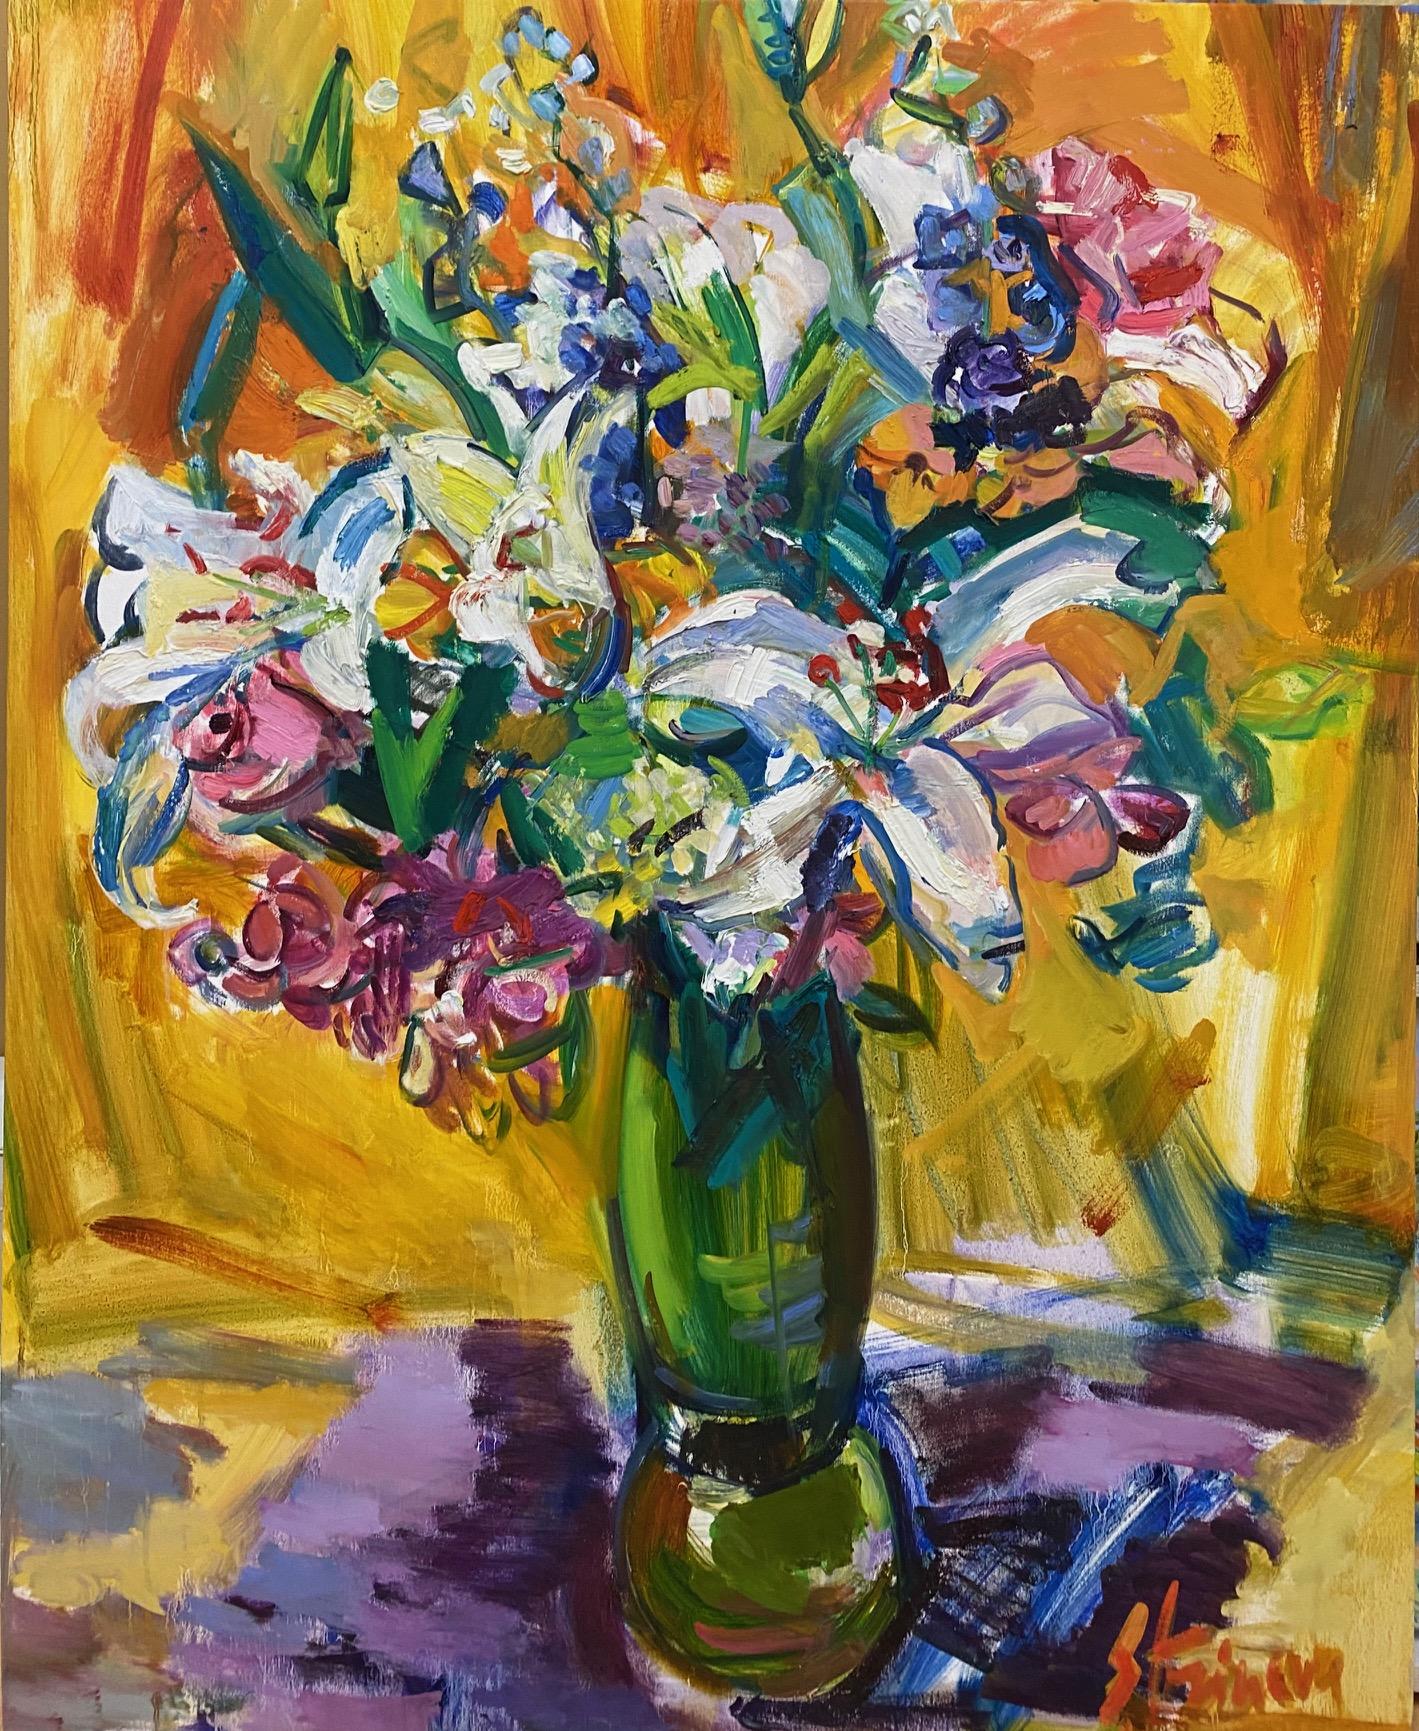 Flowers in a Vase, original 42 x 33 abstract expressionist floral still life